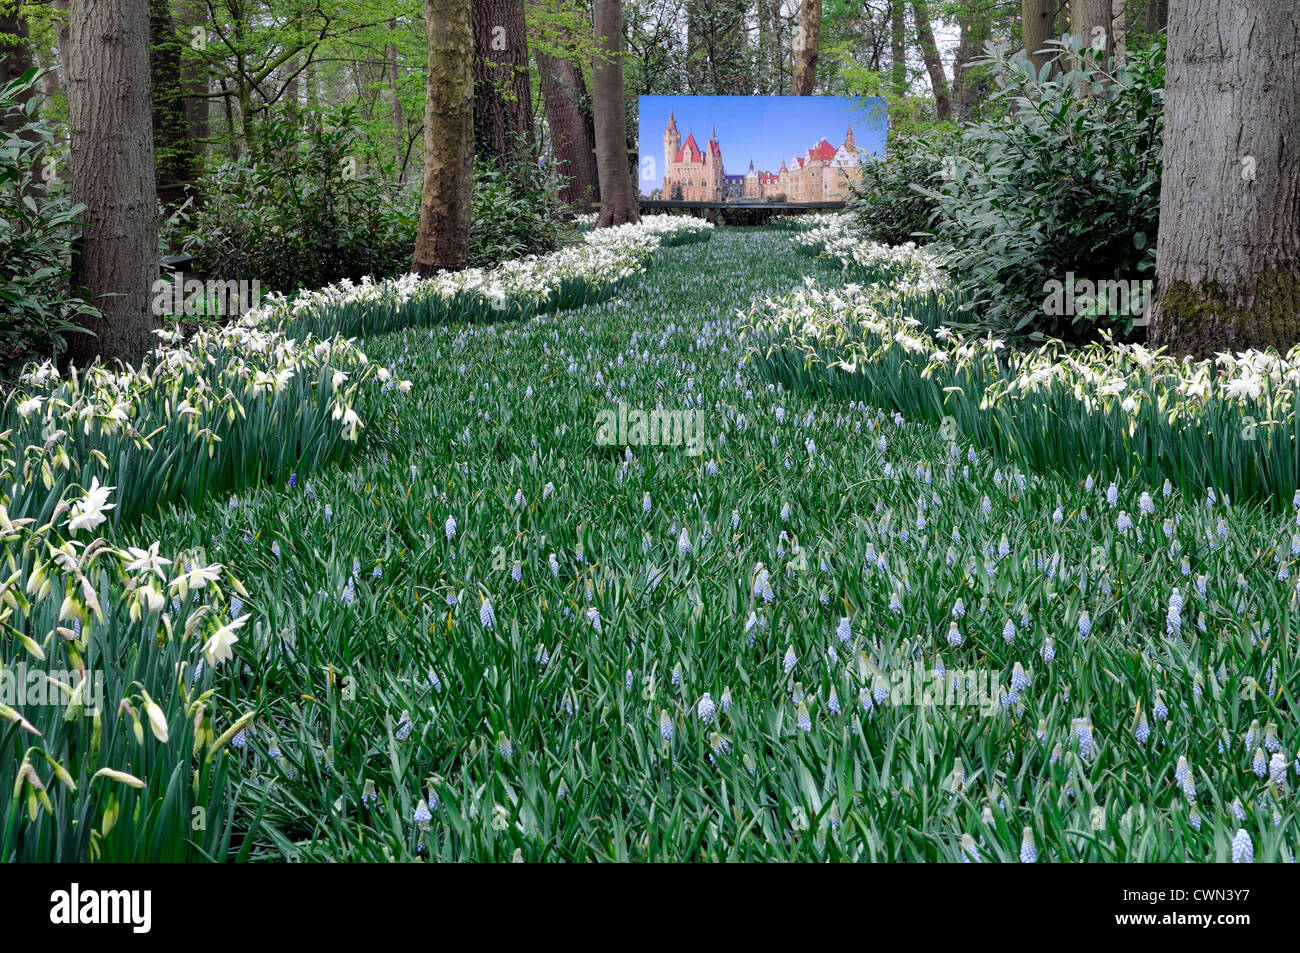 Muscari blue flowers narcissus thalia river effect bed spring bulb flowering bloom blossom bed display drift scheme Stock Photo